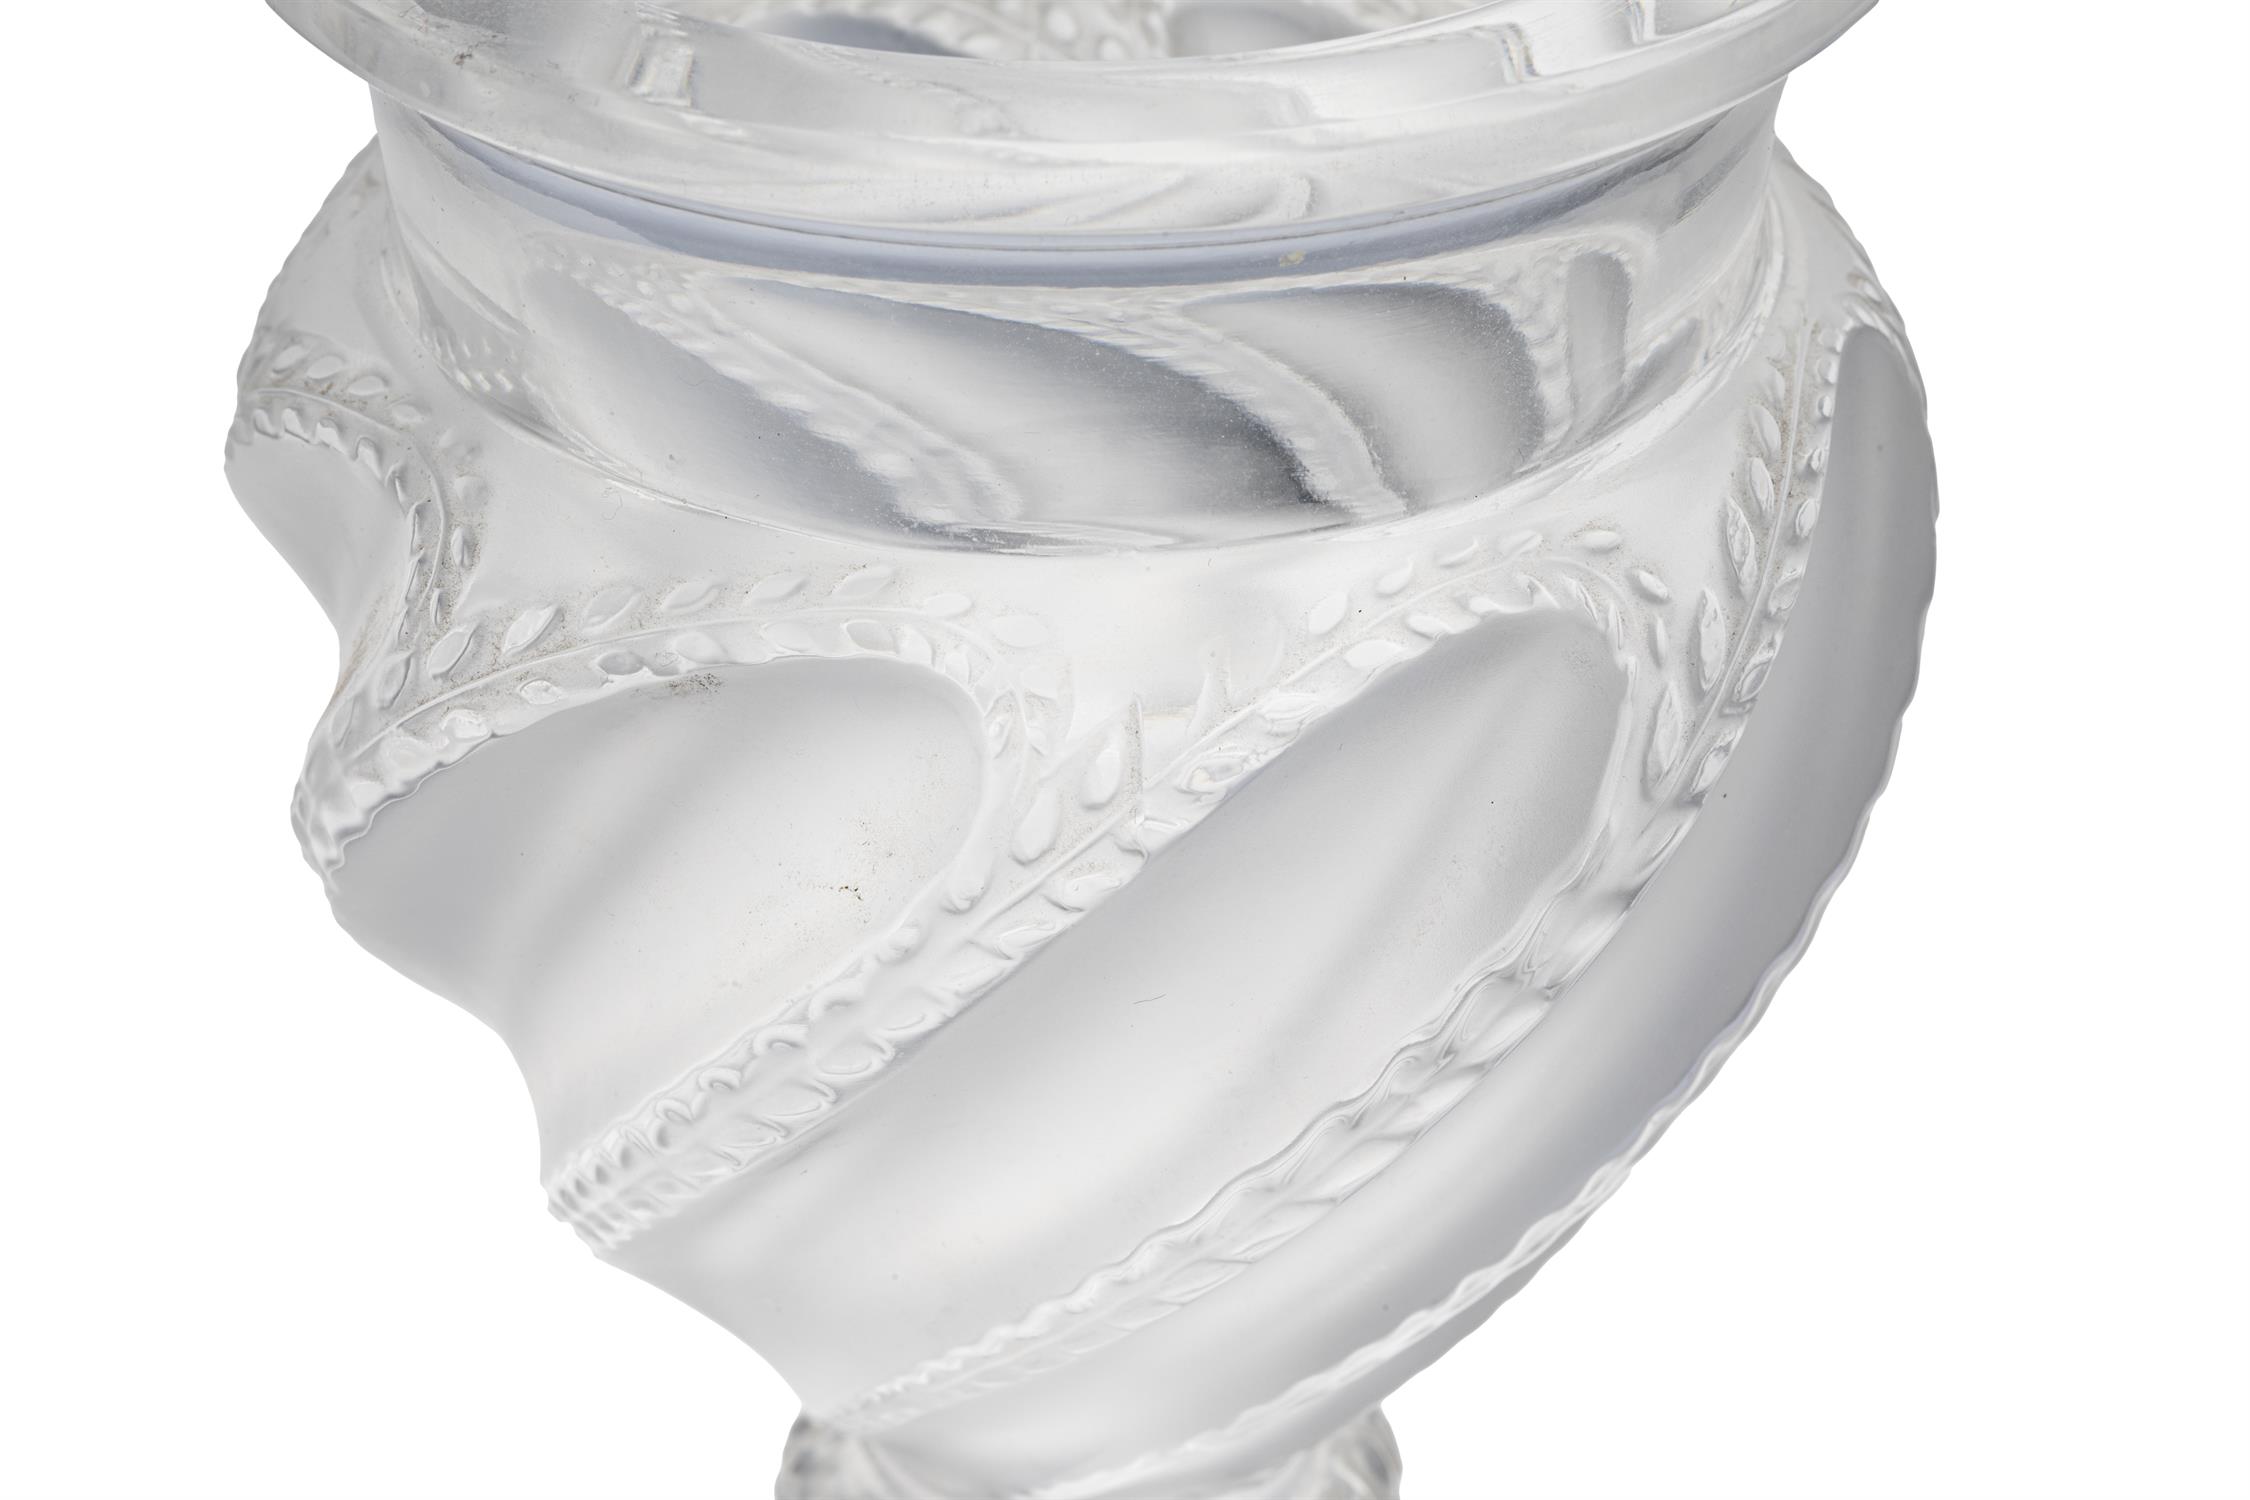 Lalique Ermenonville vase and Anemone flower head candlestick - Image 2 of 4